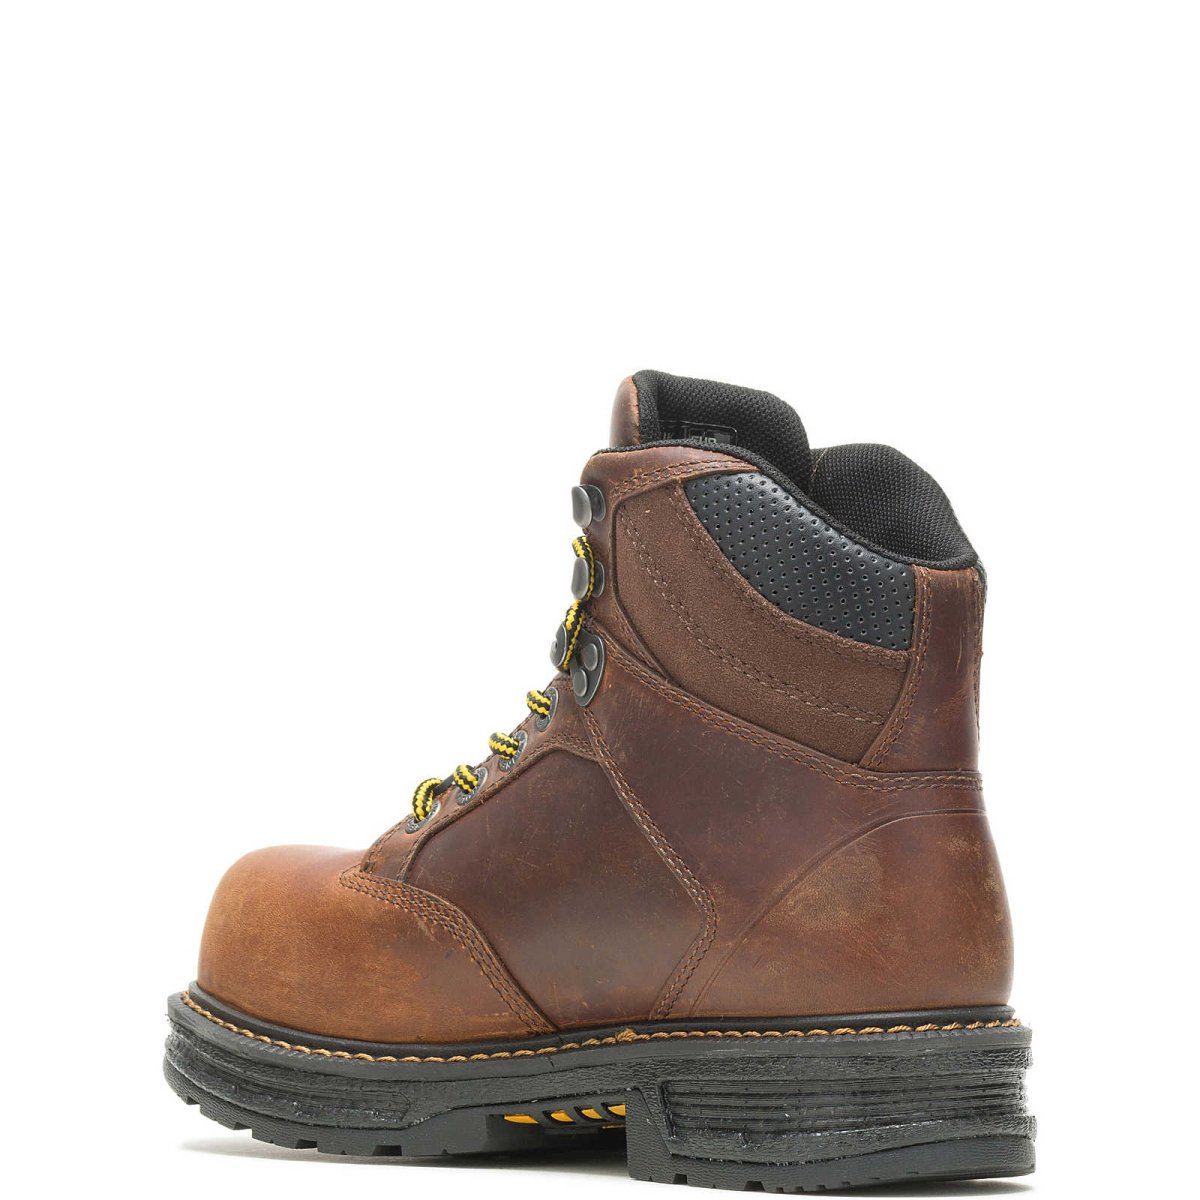 WOLVERINE HELLCAT WOMEN'S SAFETY TOE WORK BOOT (W211154) IN TOBACCO - TLW Shoes